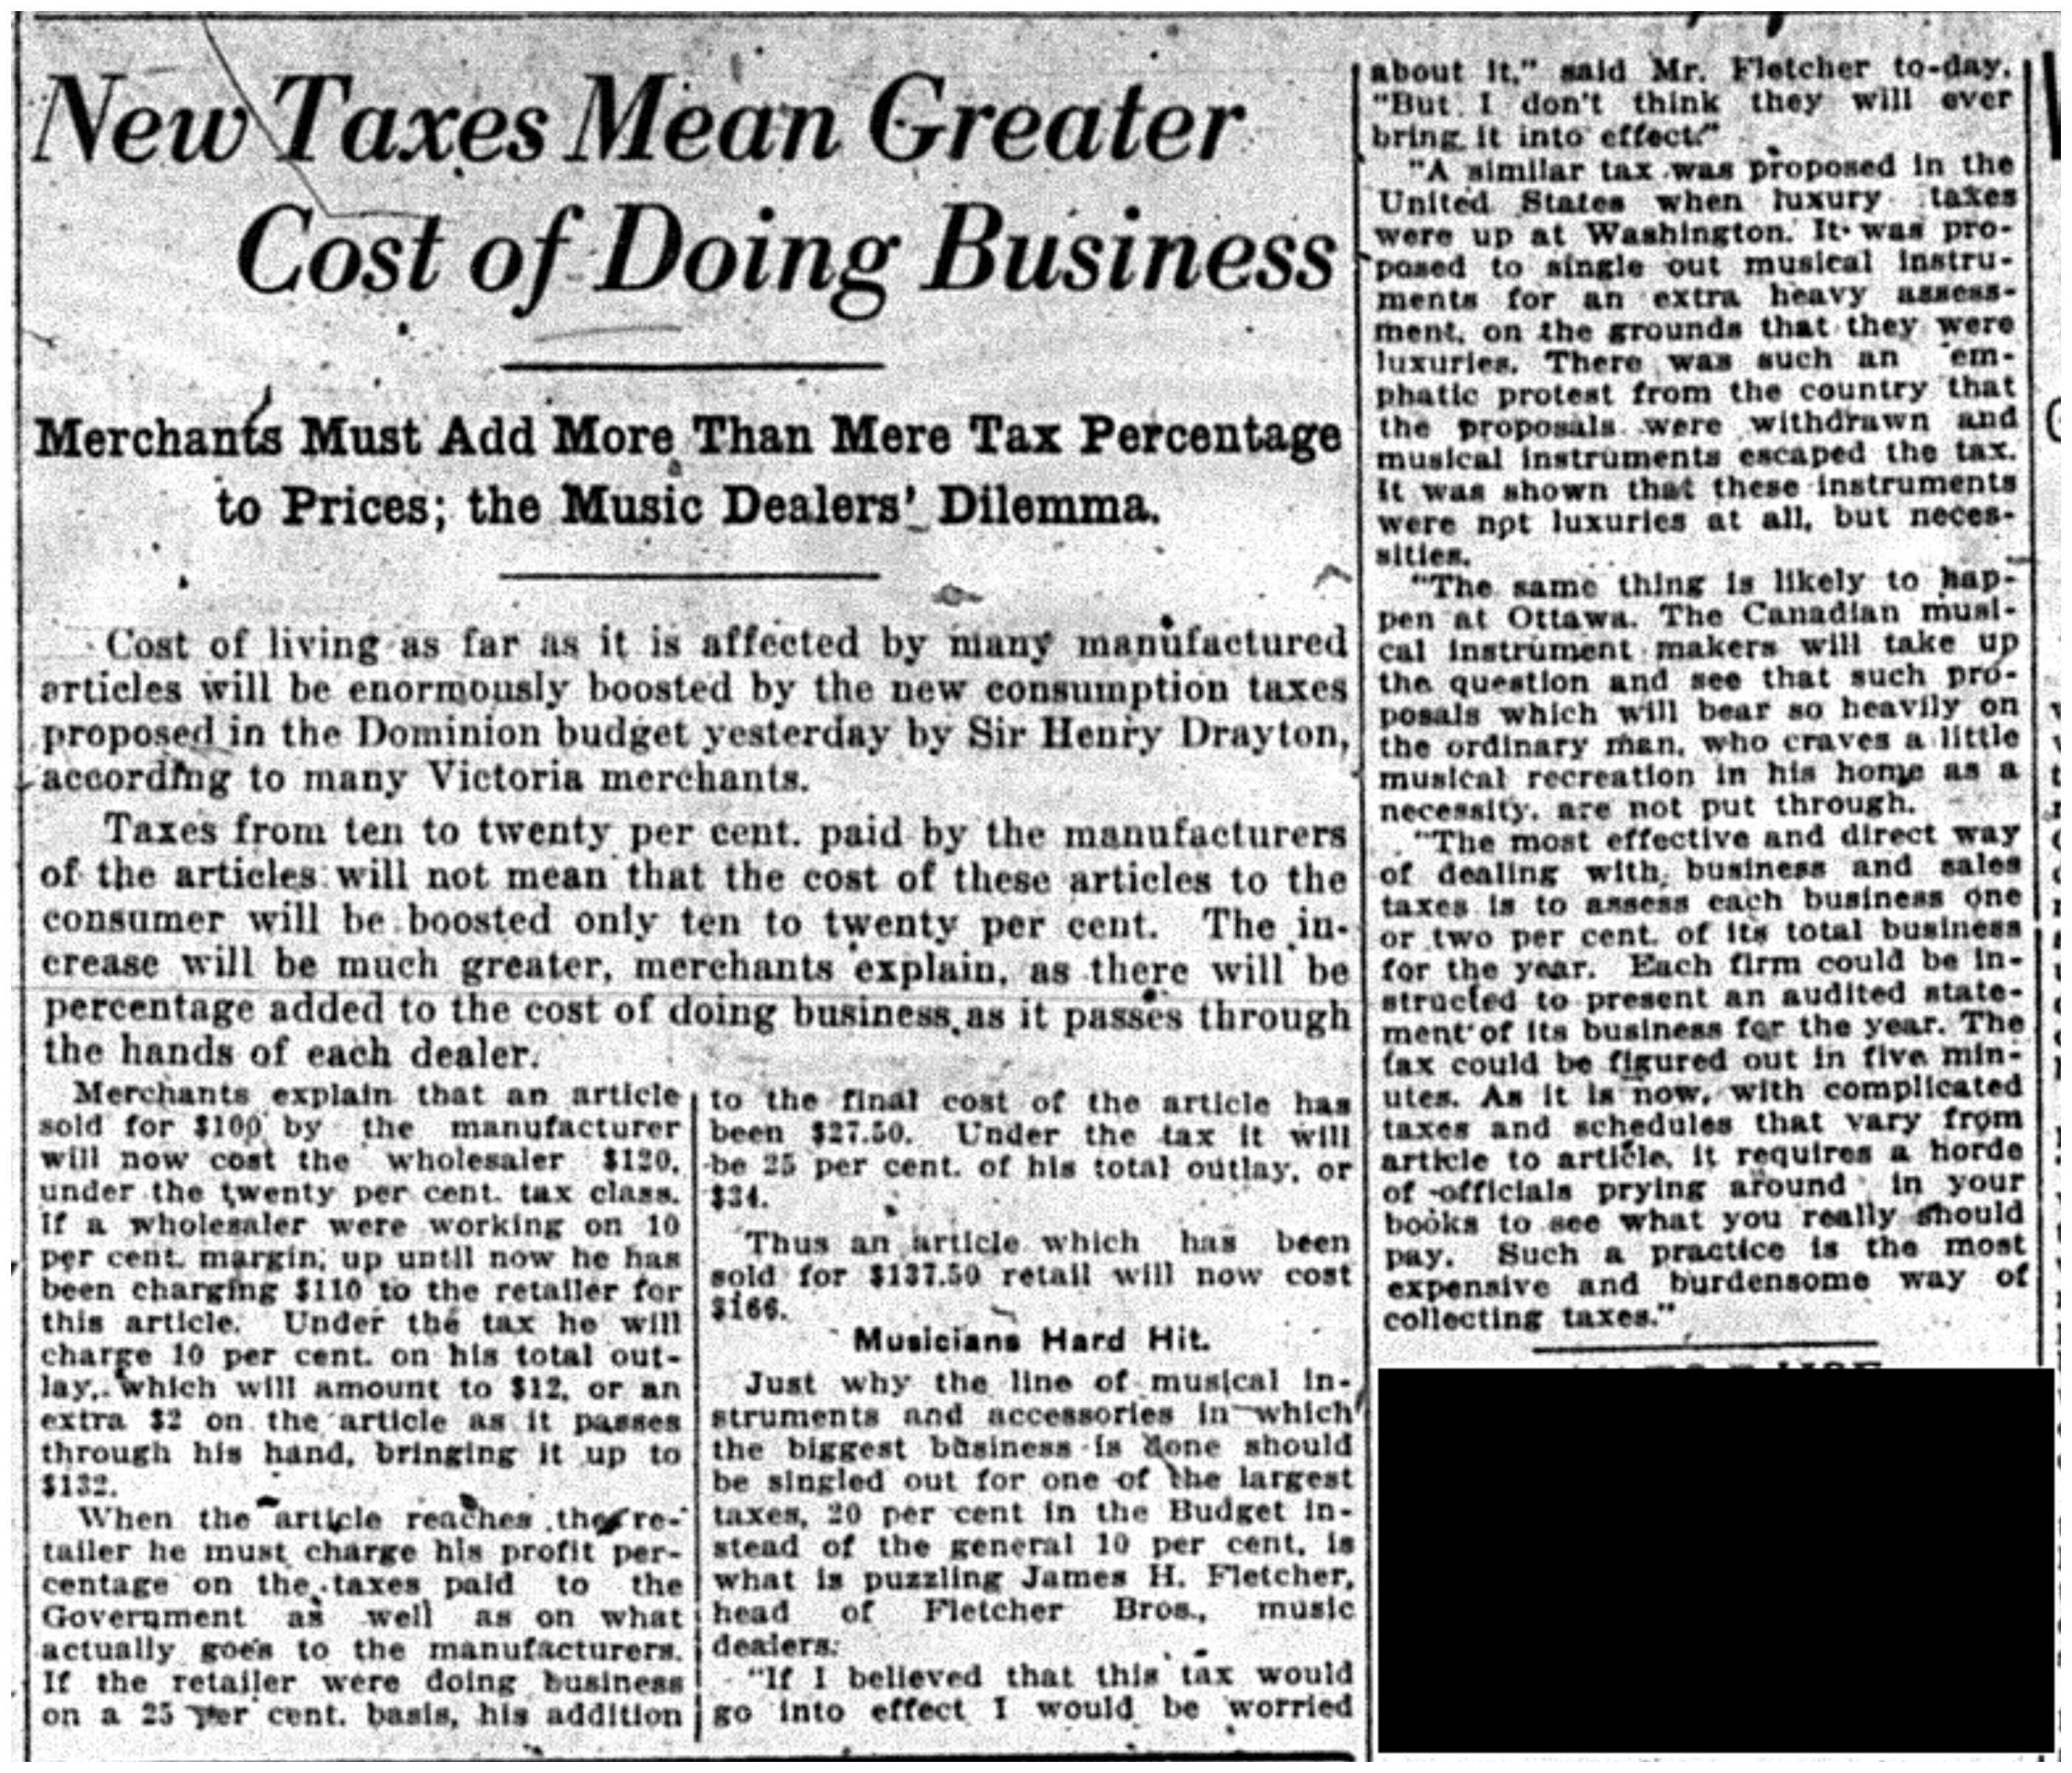 "New Taxes Mean Greater Cost of Doing Business"